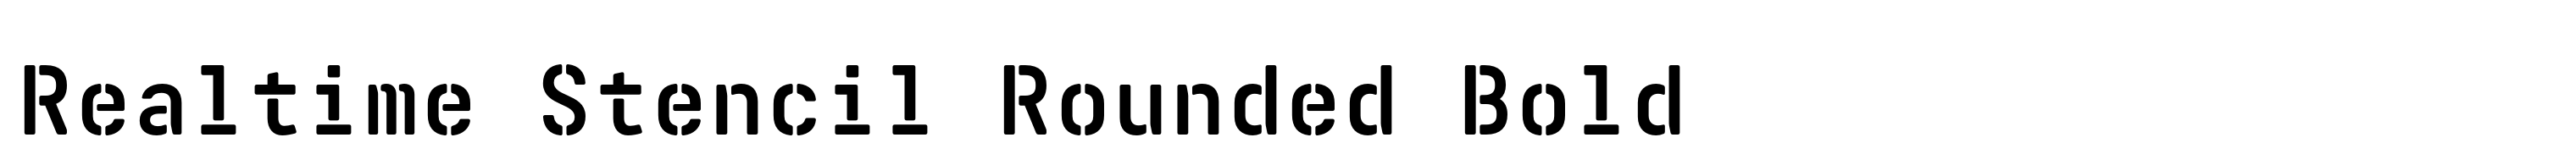 Realtime Stencil Rounded Bold